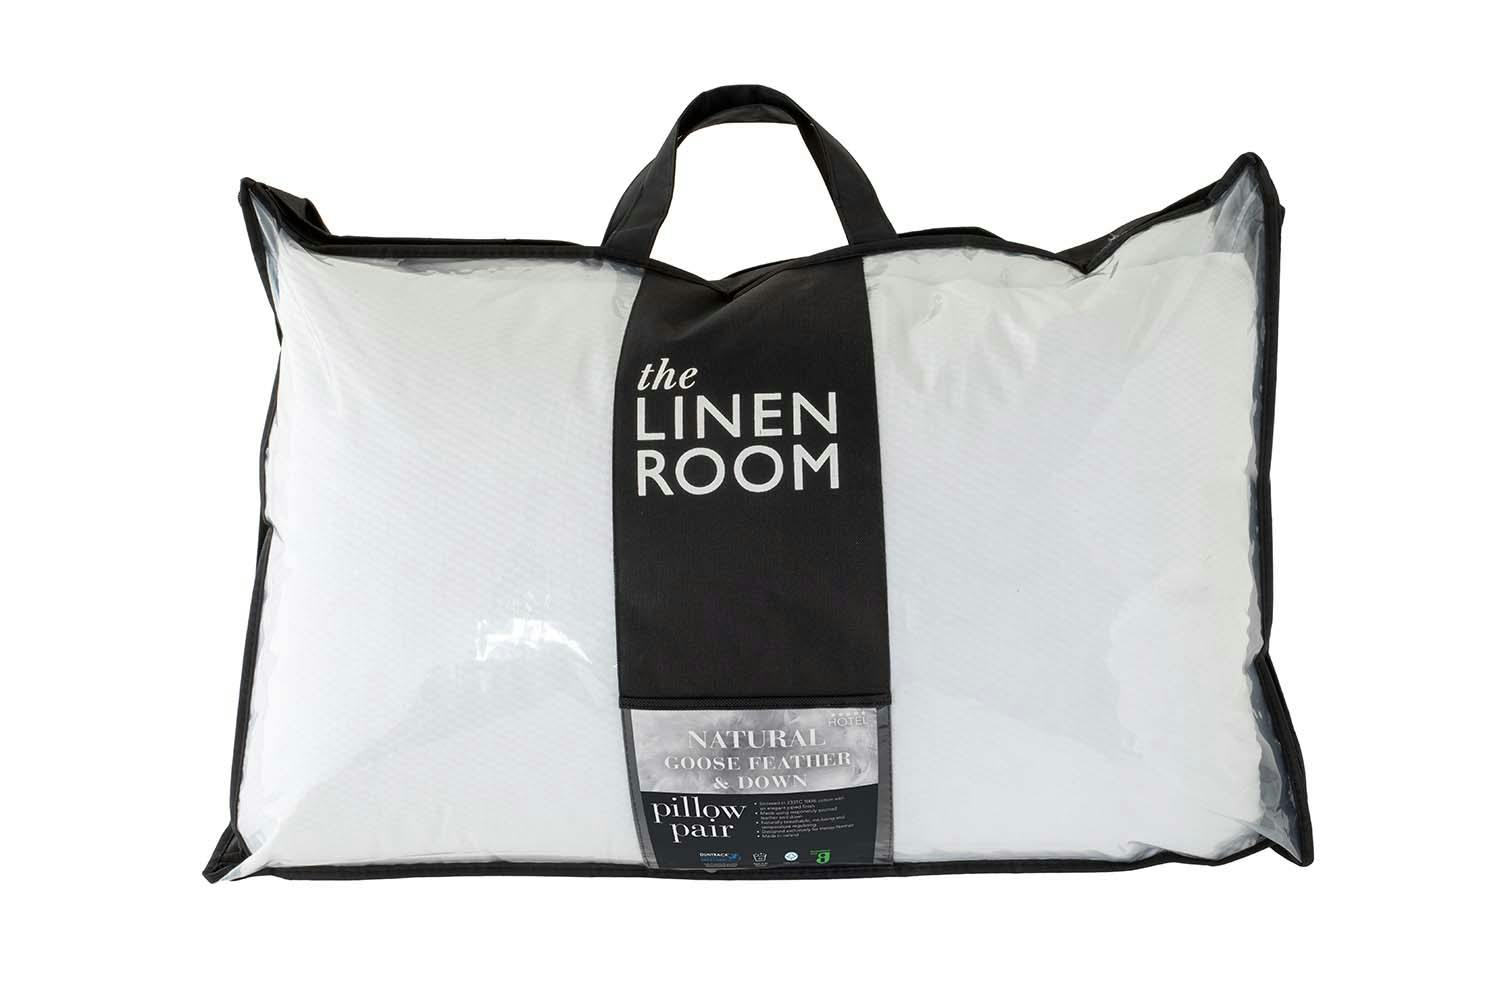 The Linen Room | Natural Goose feather & Down | Pillow Pair